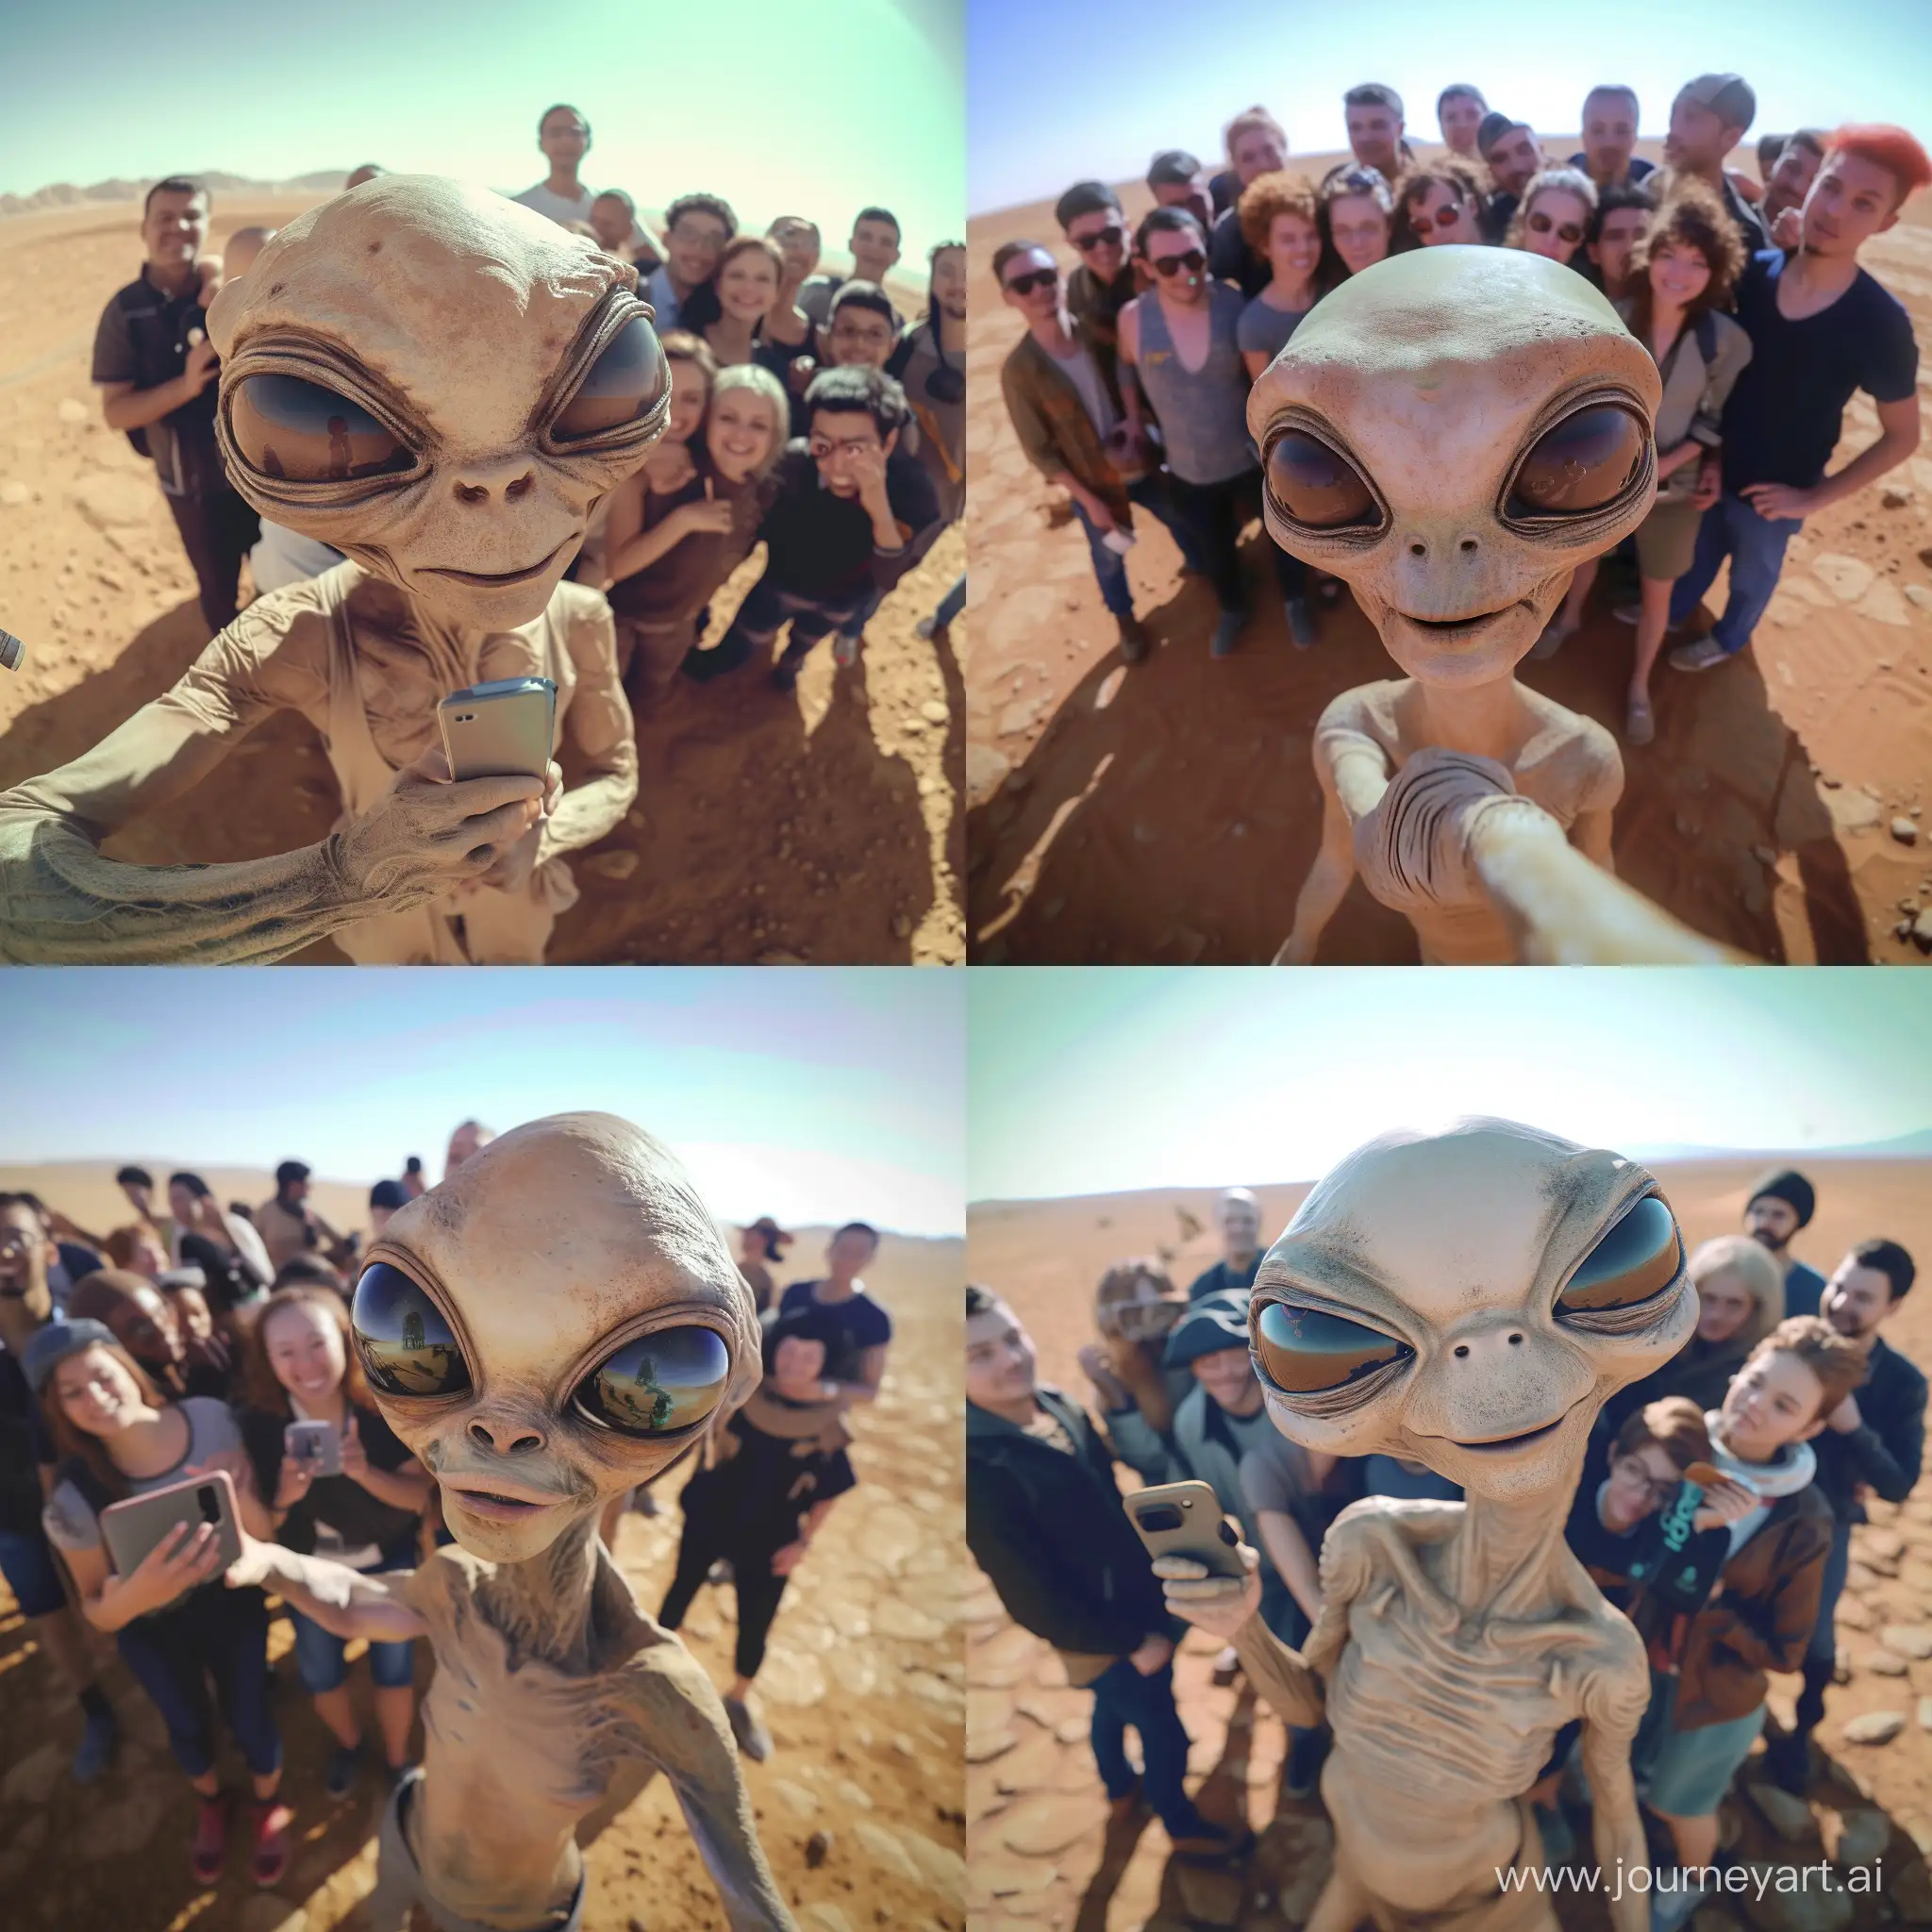 Friendly-Extraterrestrial-Selfie-with-Diverse-Humans-on-Mars